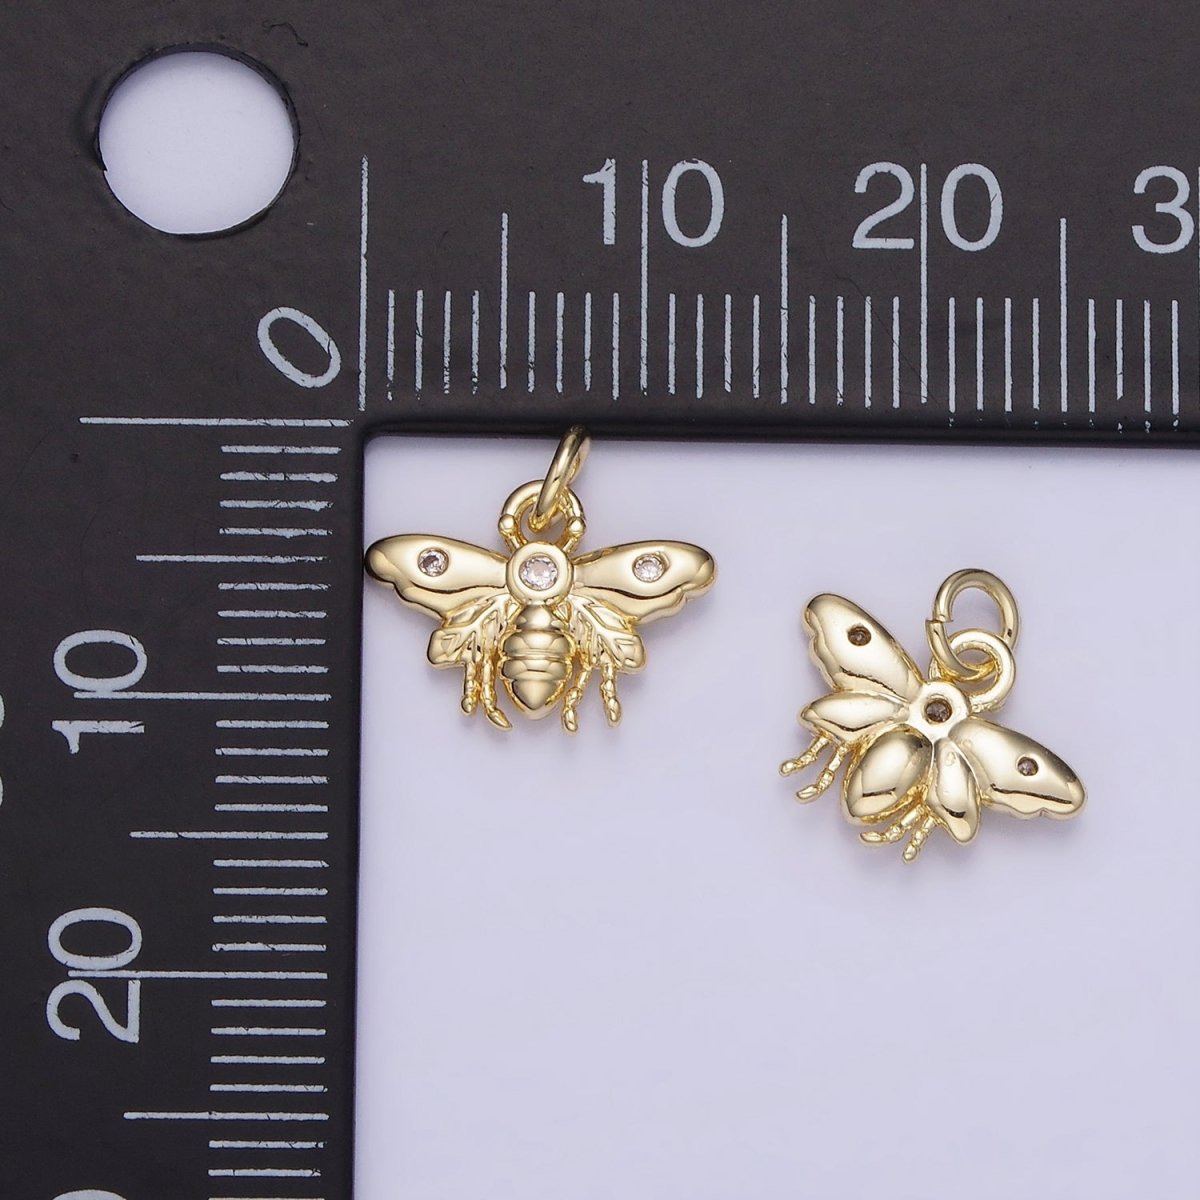 14K Gold Filled 10mm Triple CZ Queen Bumble Bee Wasps Insect Charm | AG717 - DLUXCA